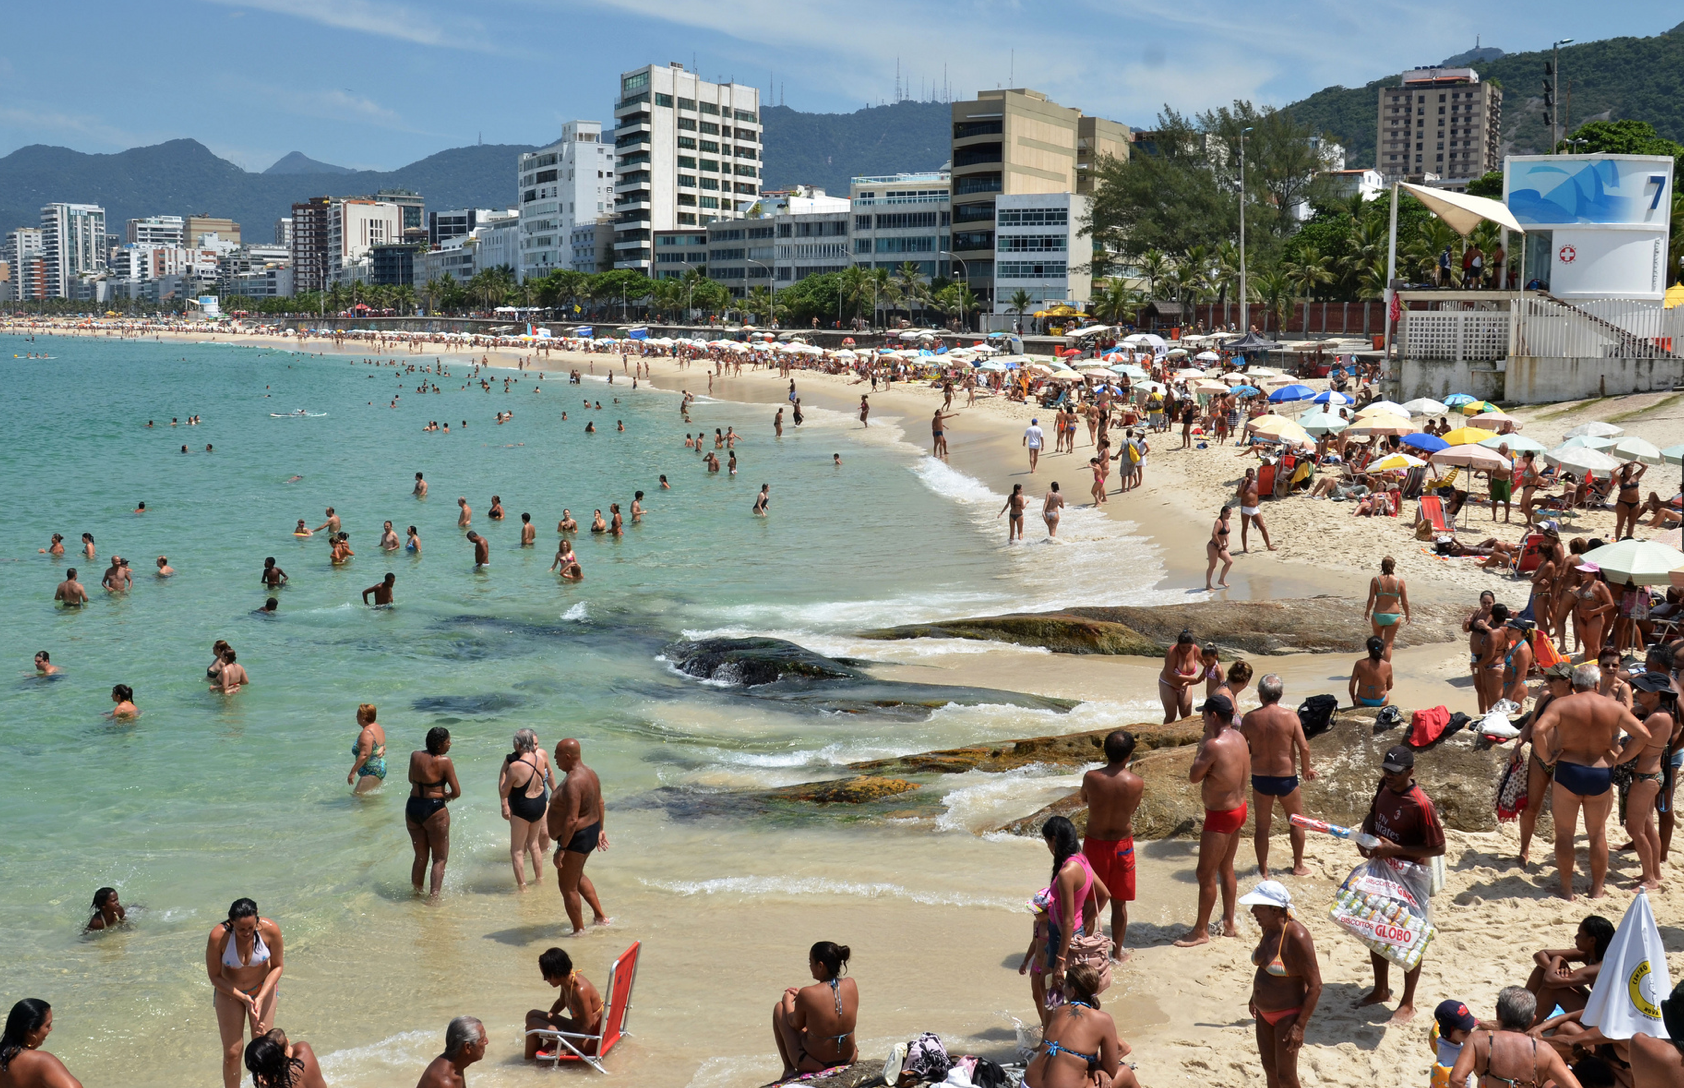 Rio to Implement Policies to Decrease Thefts on Beaches